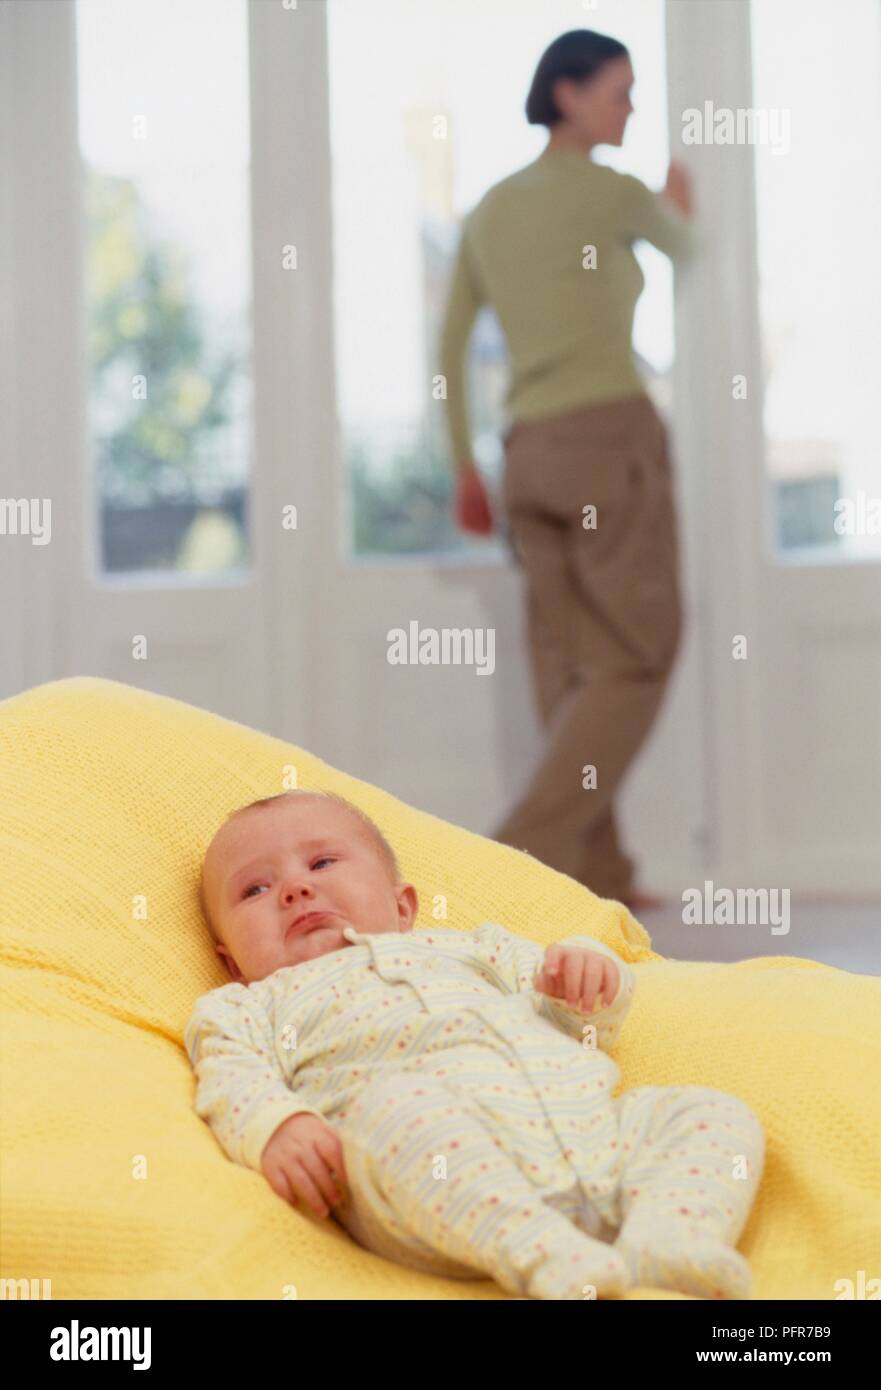 Baby lying in blanket, woman standing by window in the background Stock Photo